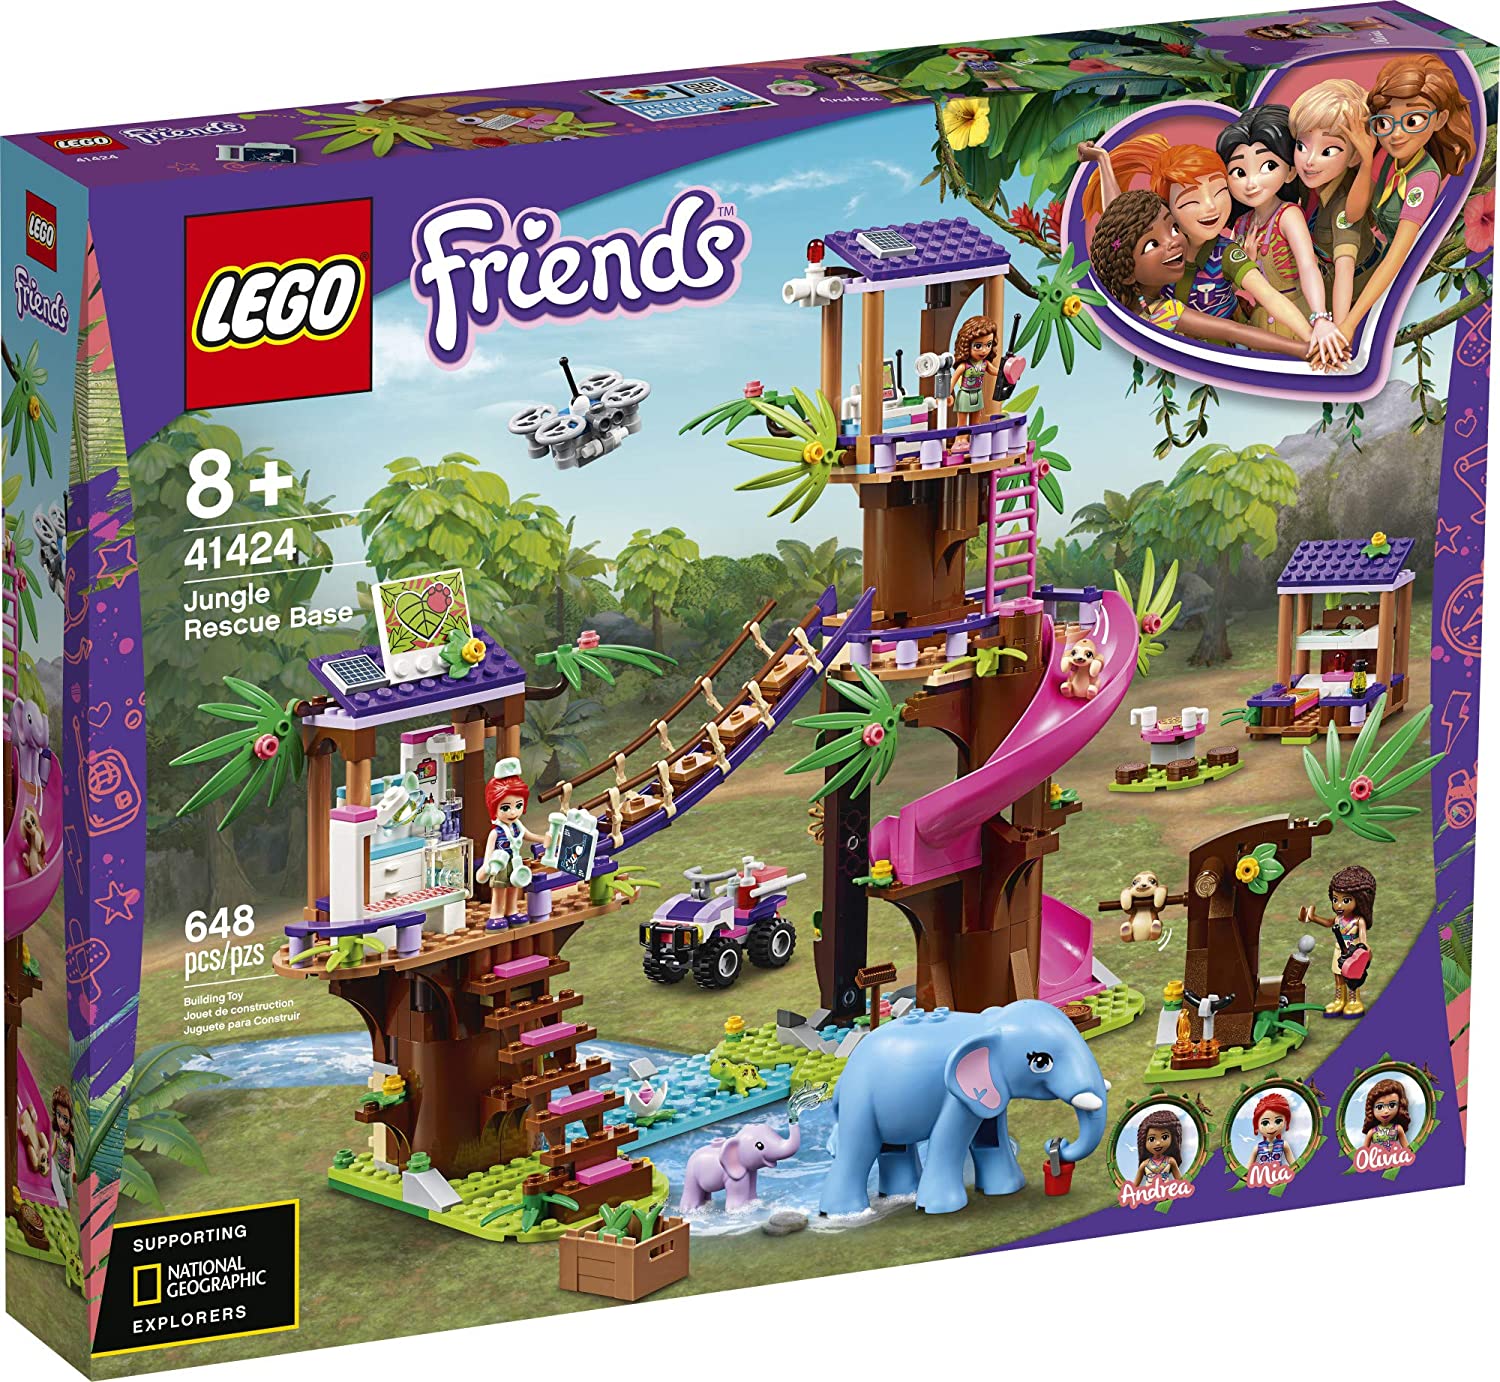 Lego Friends Jungle Rescue Base Playset, 648 Pieces, -- ANB Baby